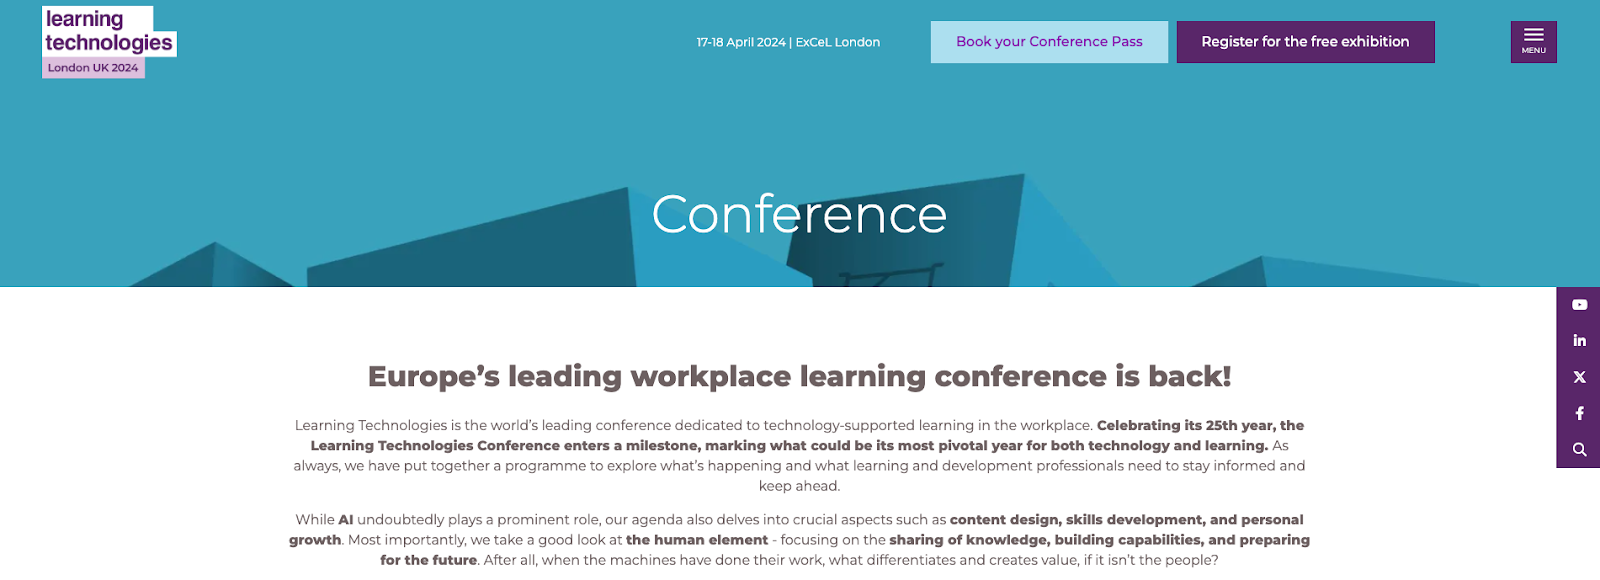 Learning Technologies is Europe's leading workplace learning conference.